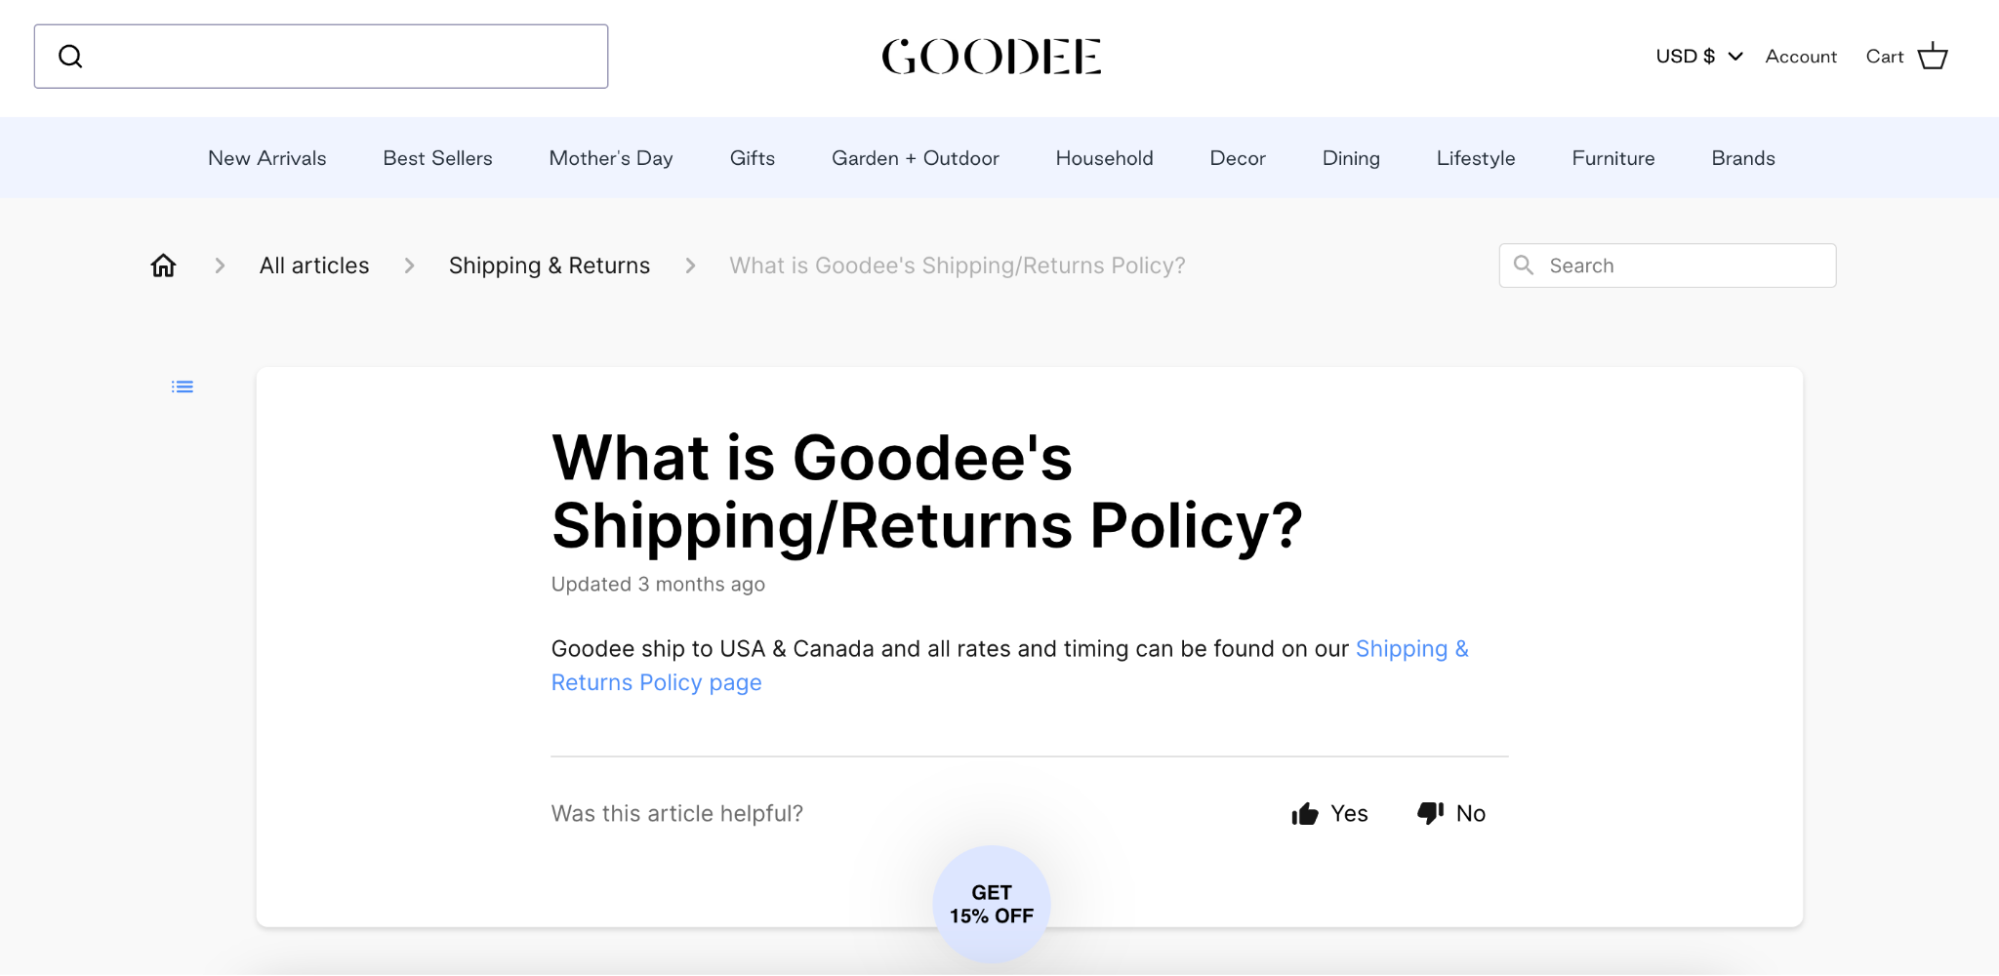 Goodee’s shipping and returns policy web page.